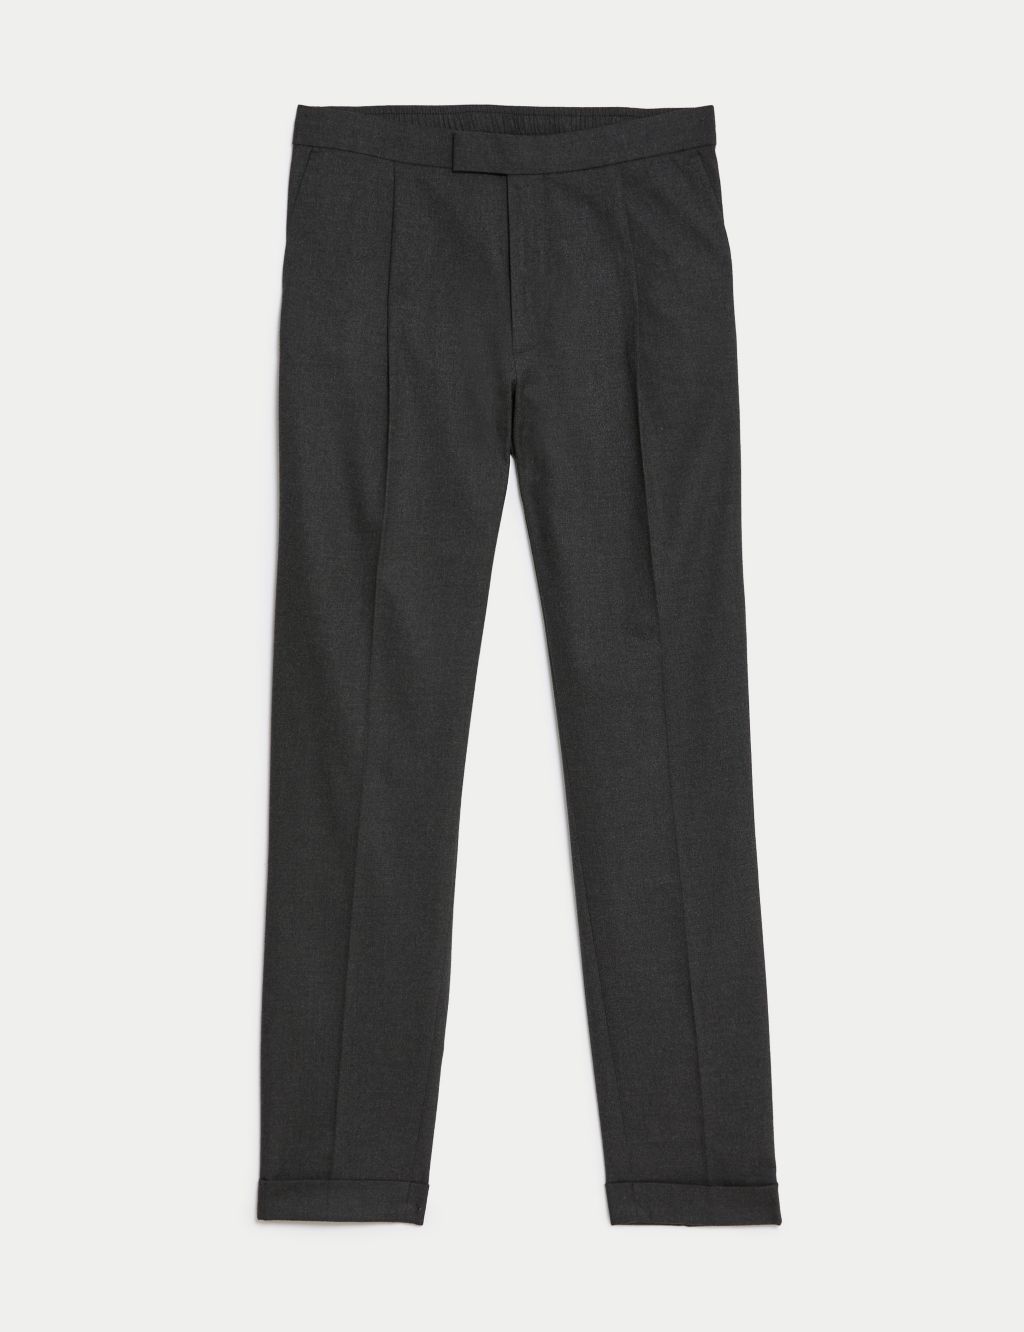 Single Pleat Brushed Stretch Trouser image 8